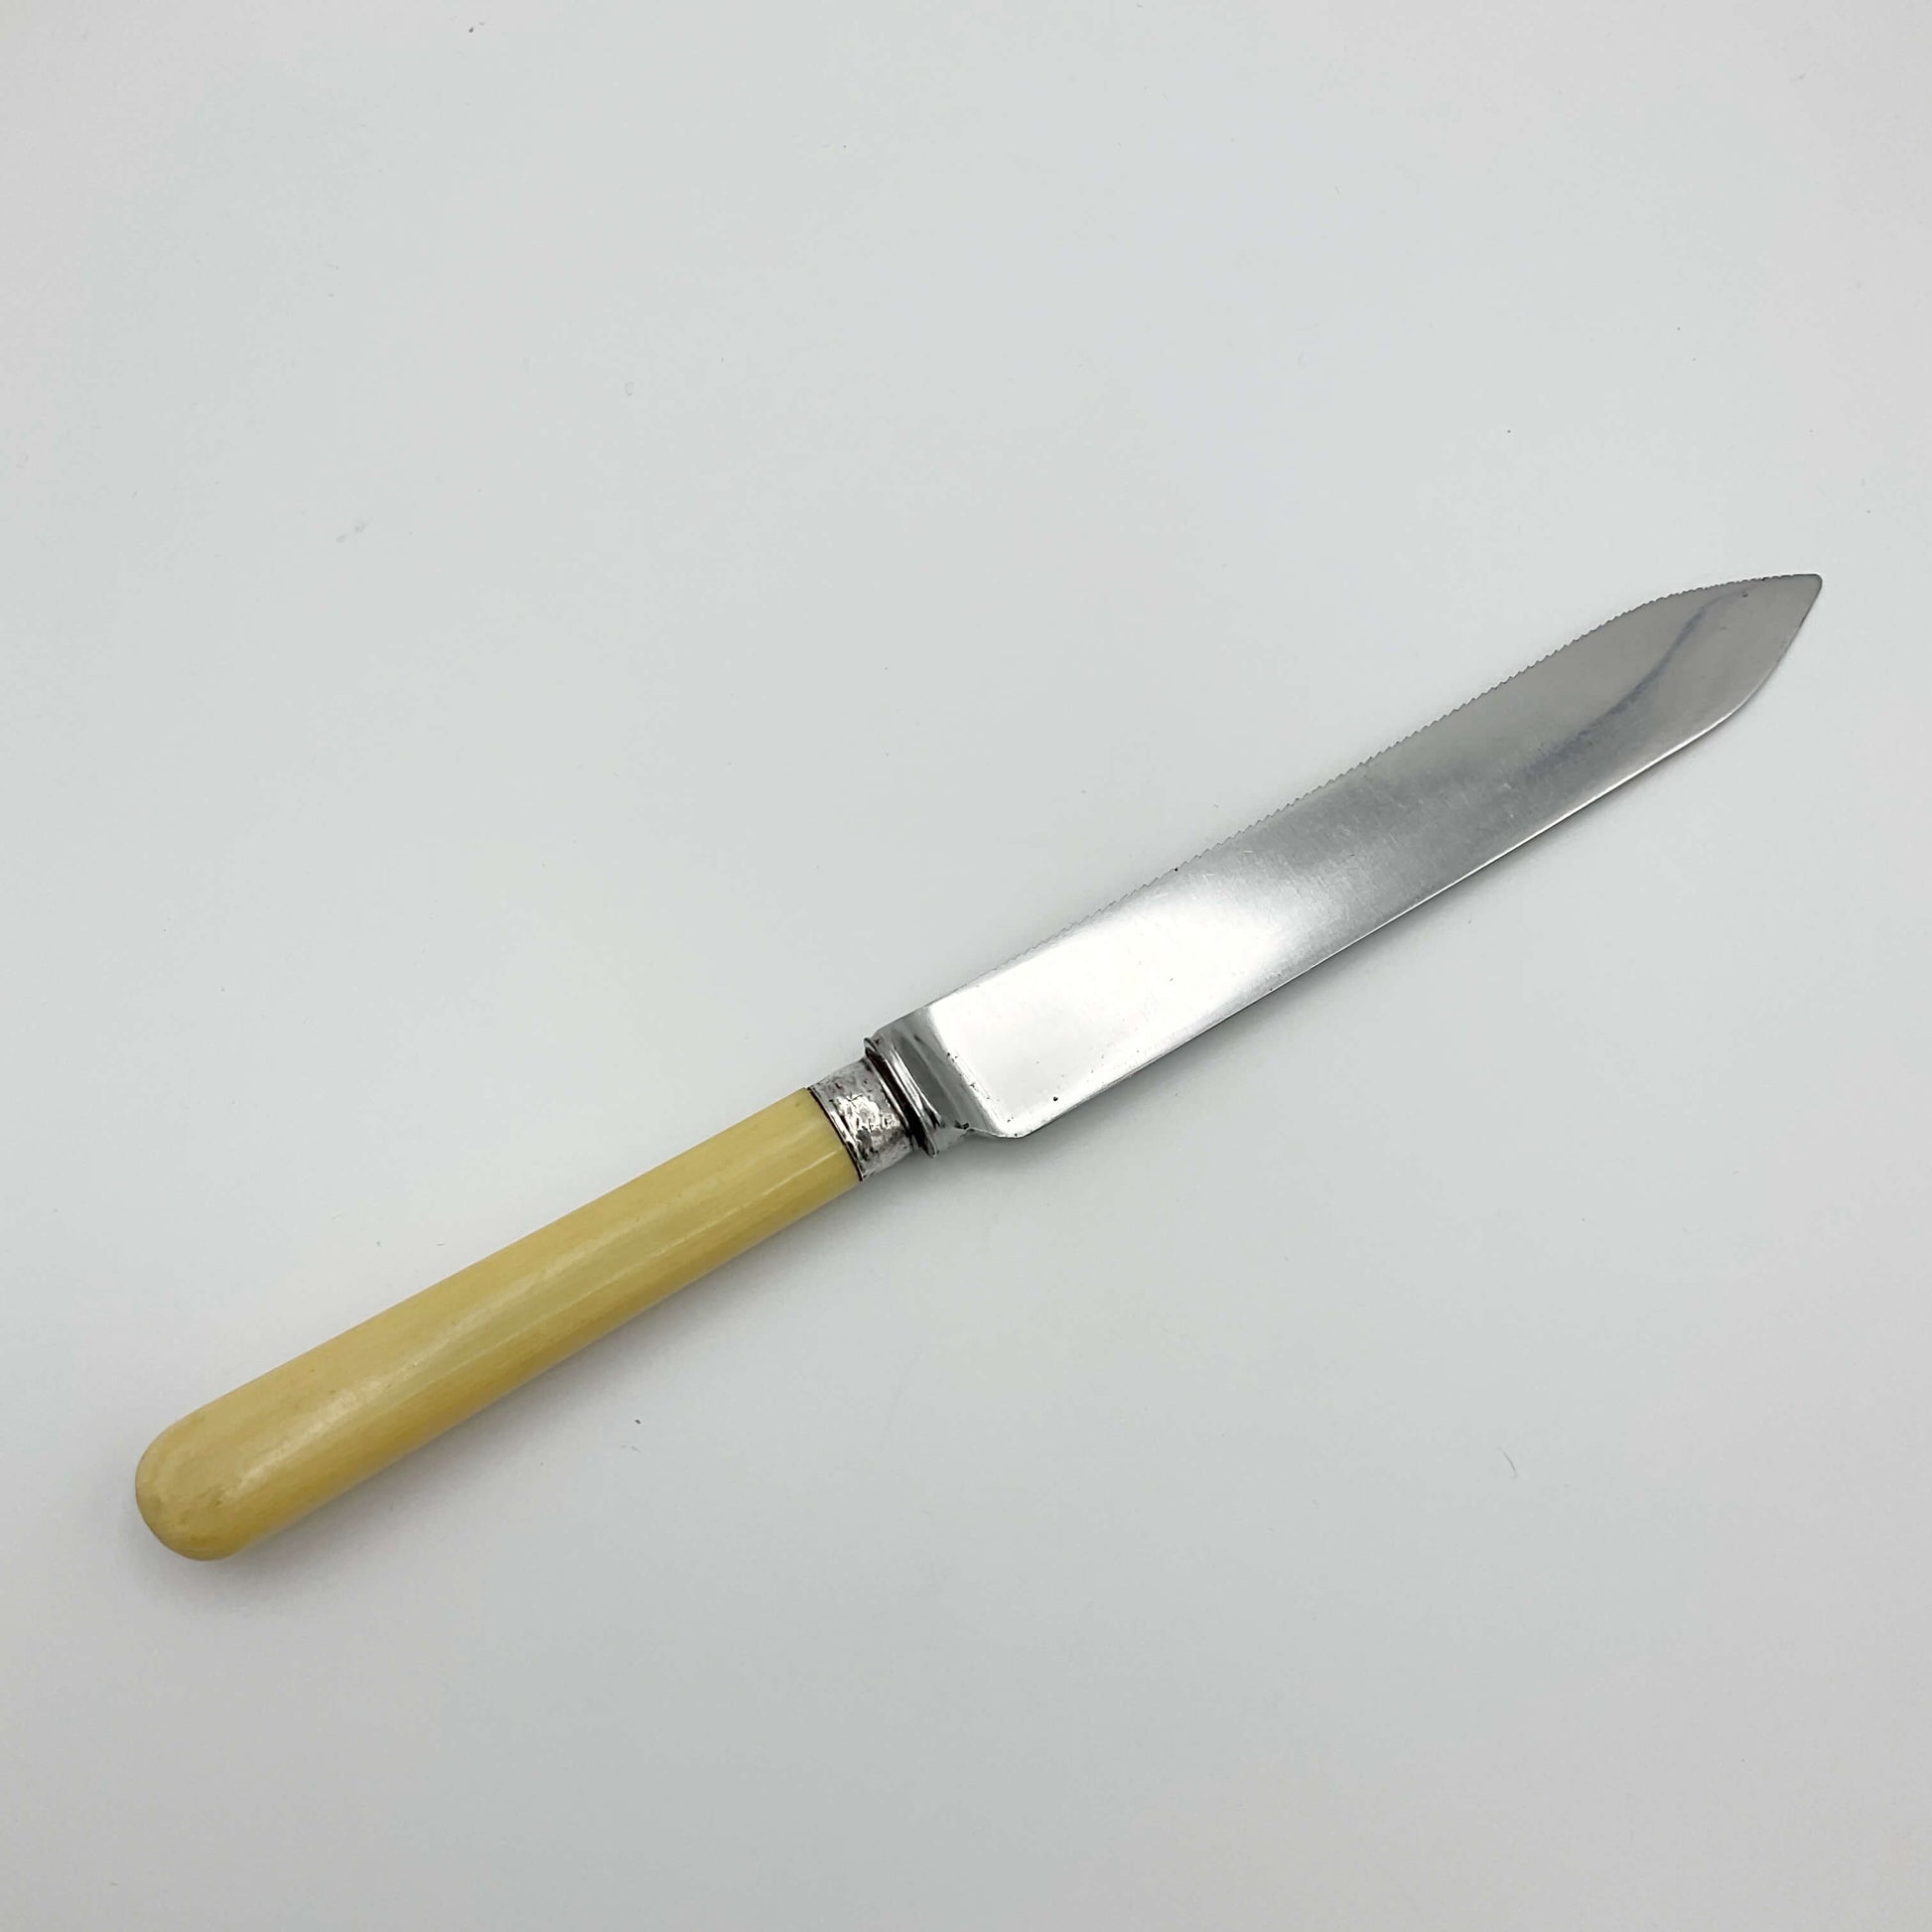 Cake knife with pointed end on white background 